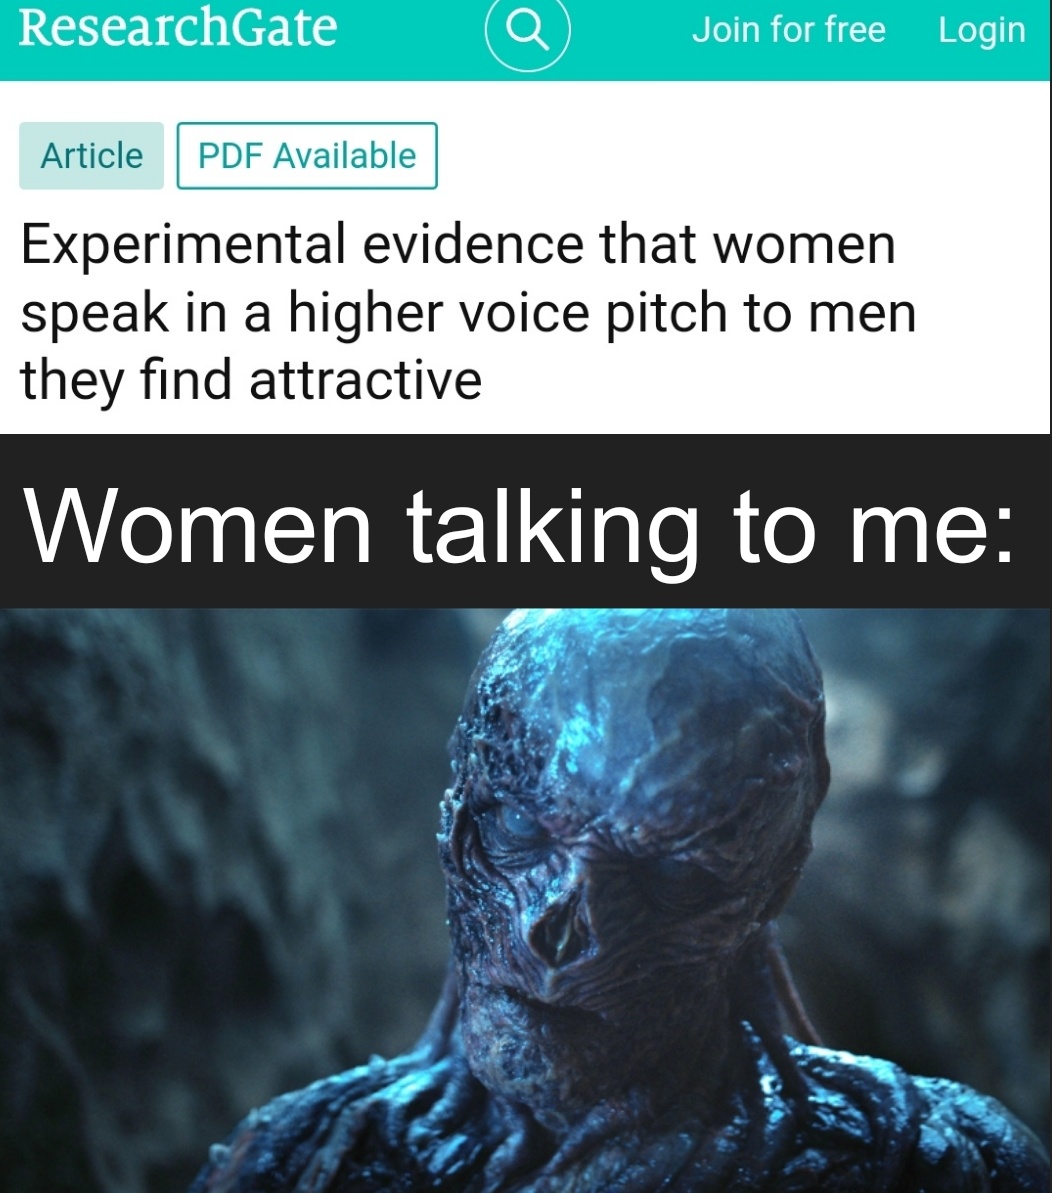 funny memes and pics - vecna stranger things - ResearchGate Article Pdf Available Join for free Login Experimental evidence that women speak in a higher voice pitch to men they find attractive Women talking to me